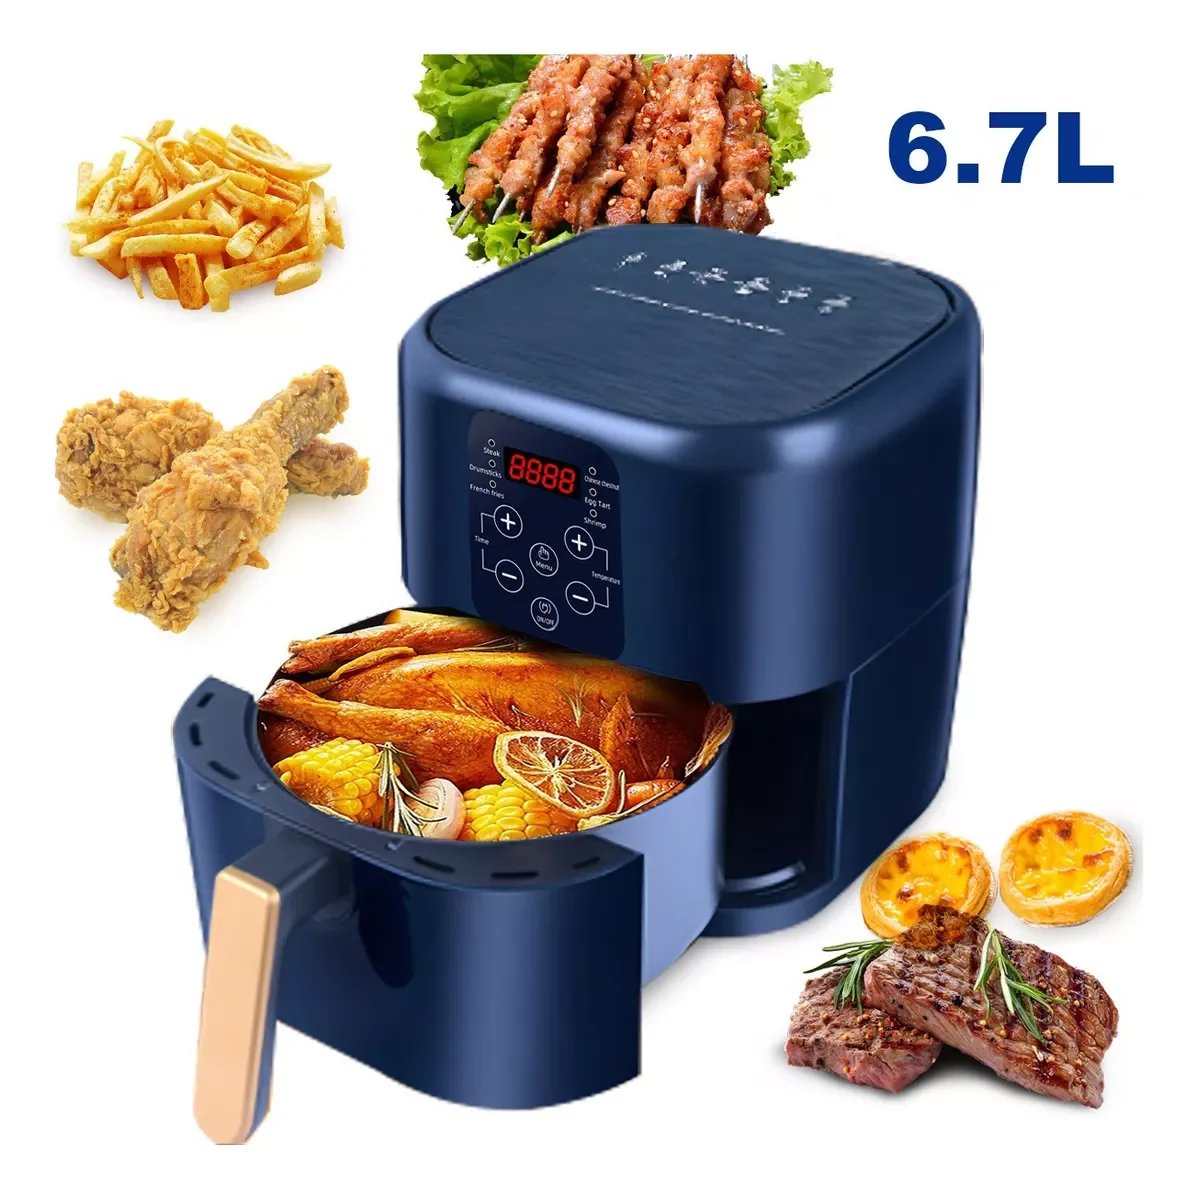 6.7L Air Fryer with LED Touch Electric oOil-free kKitchen Fryer 6 Cooking Modes for Frying Steak Pizza French Fries Chicken